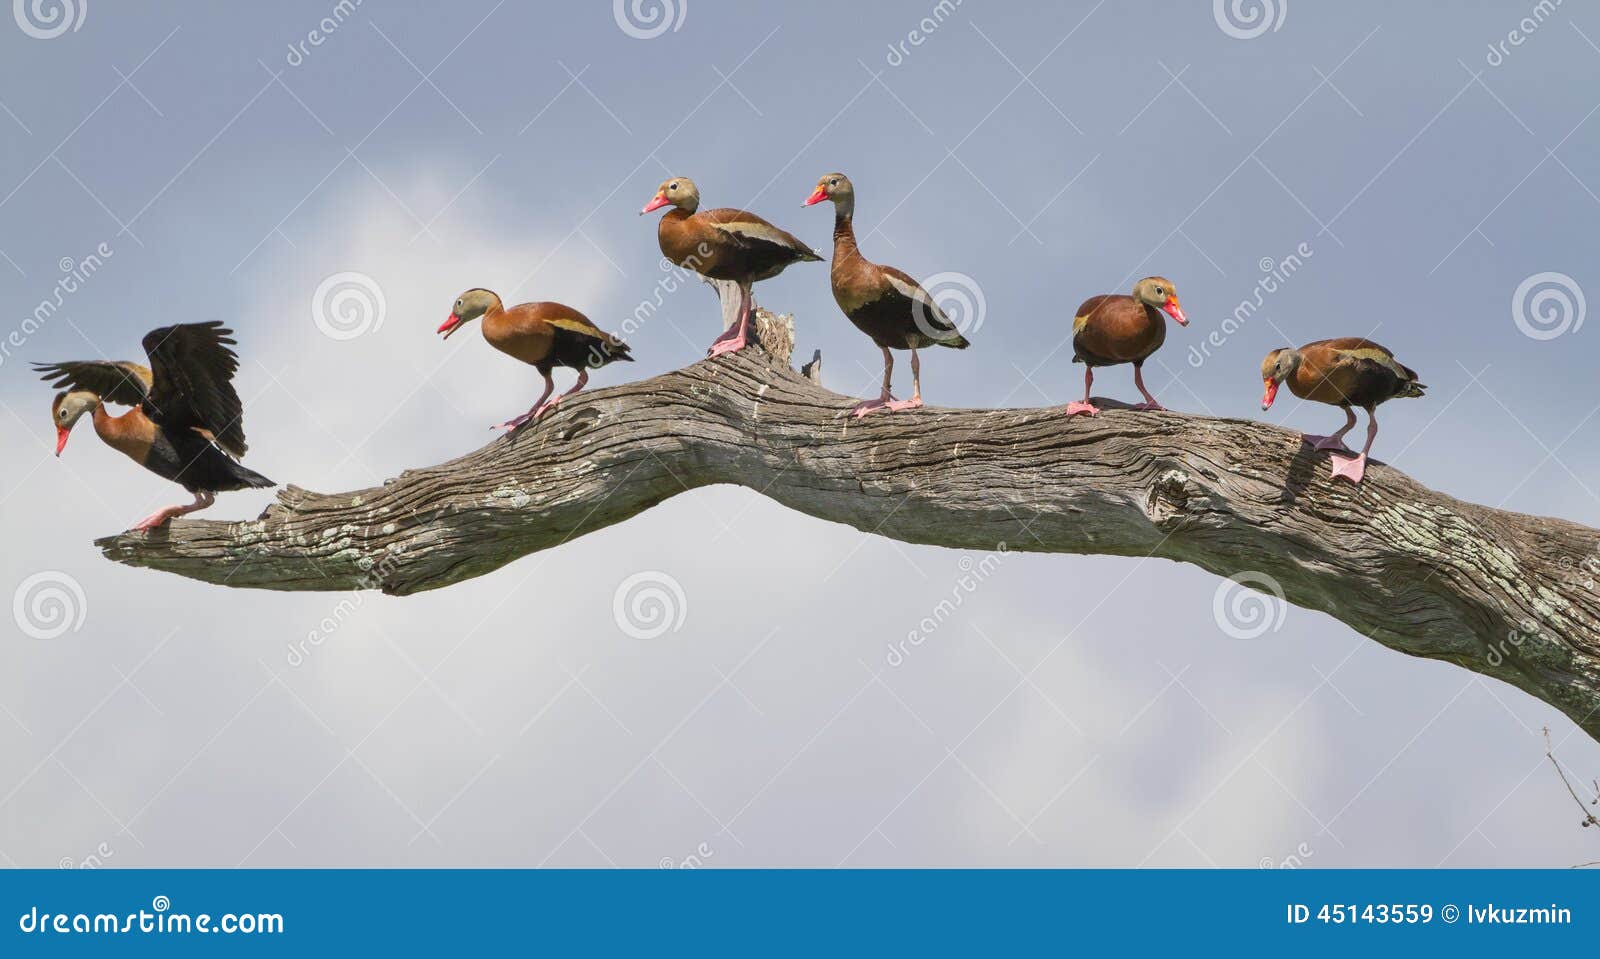 black-bellied whistling ducks (dendrocygna autumnalis) in a tree.